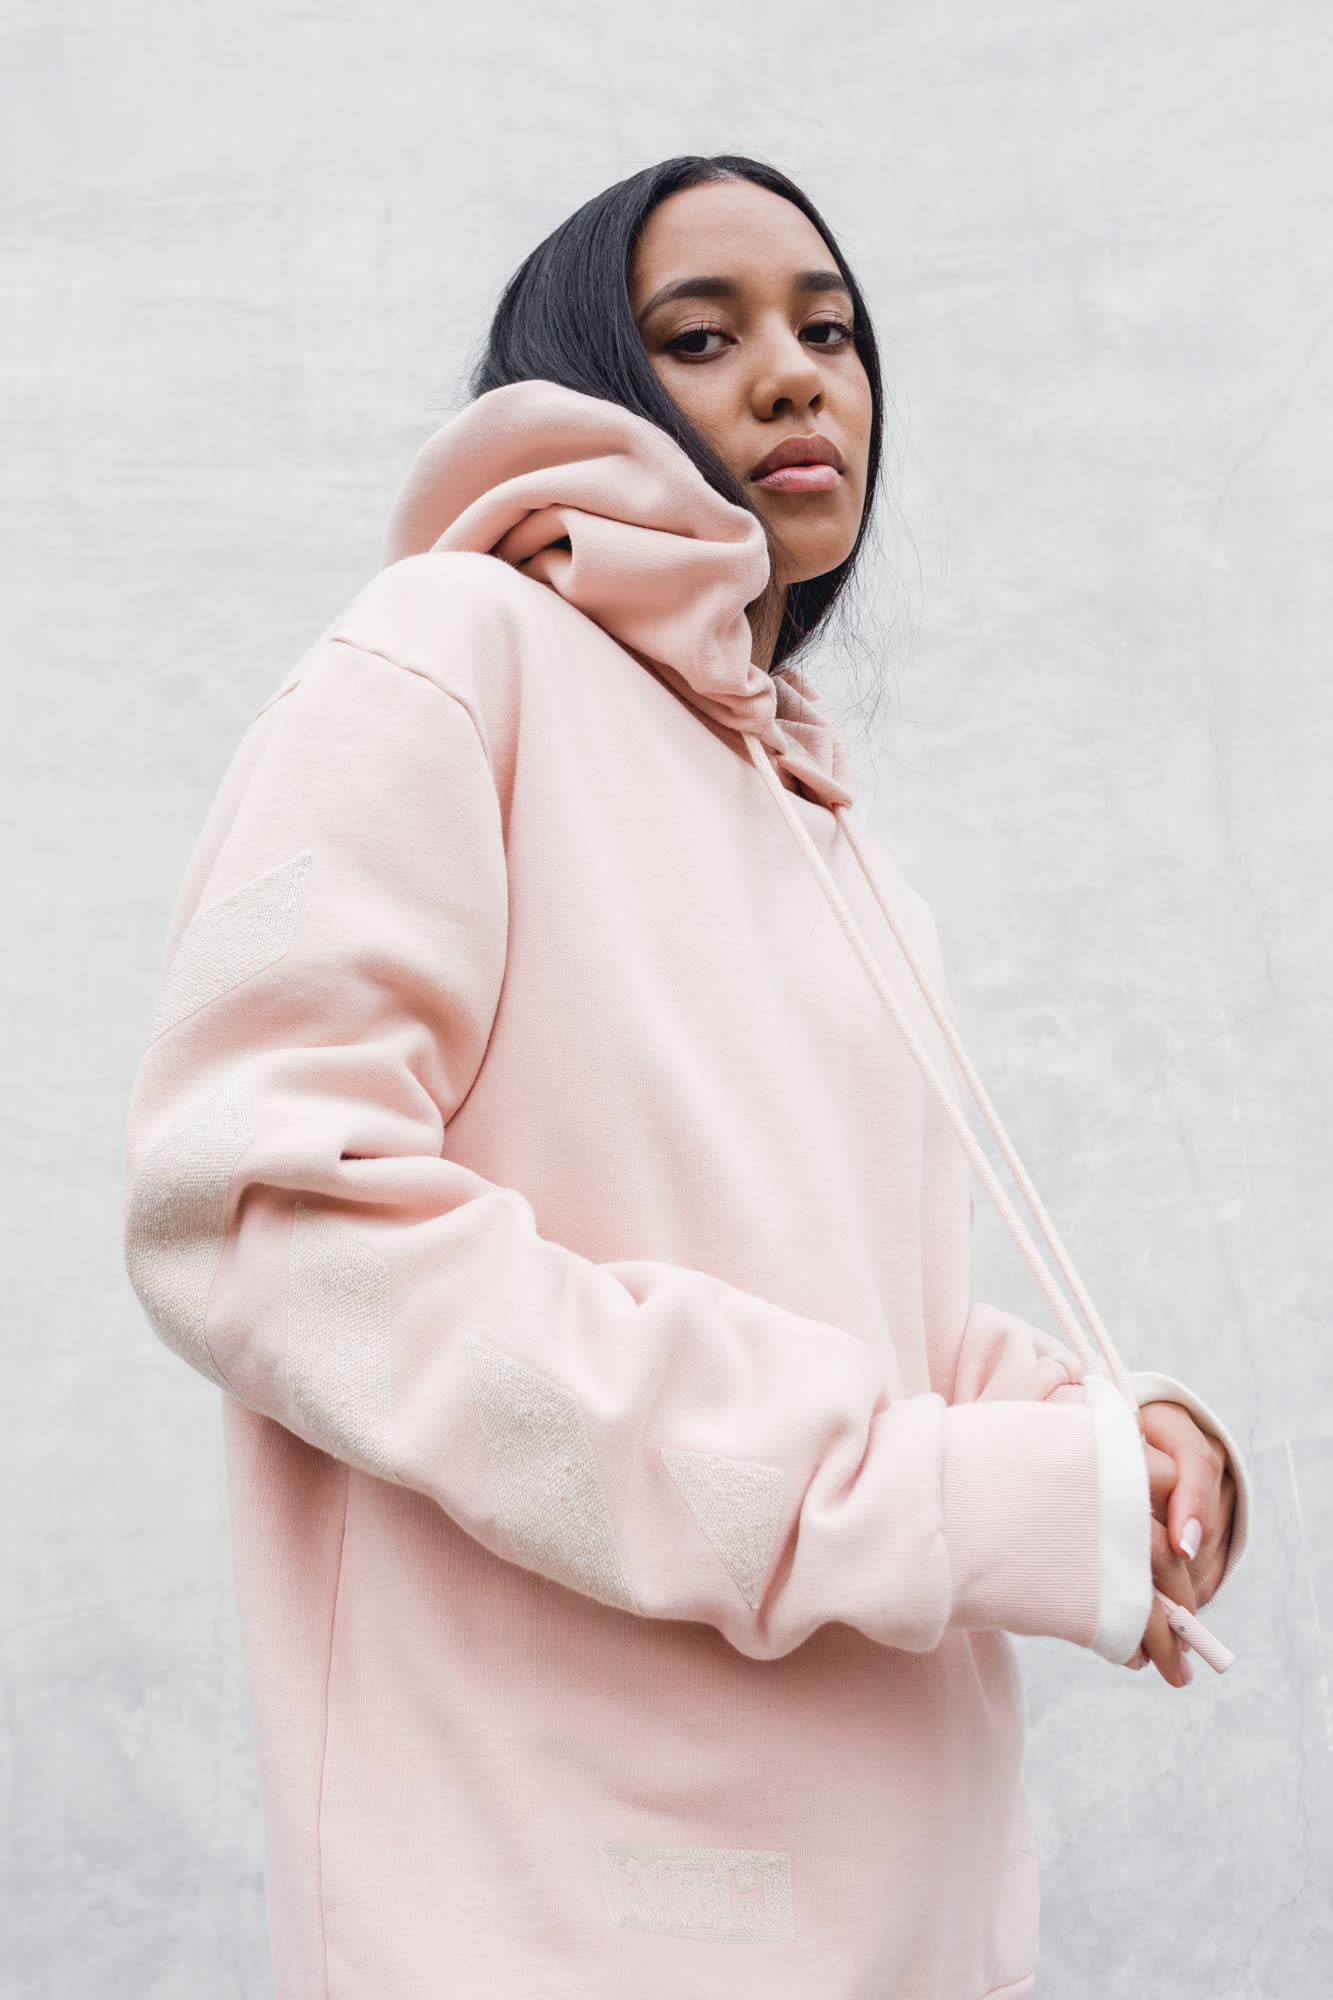 Kith and Off-White Team Up for New 'OFF-PALETTE' Capsule | Complex